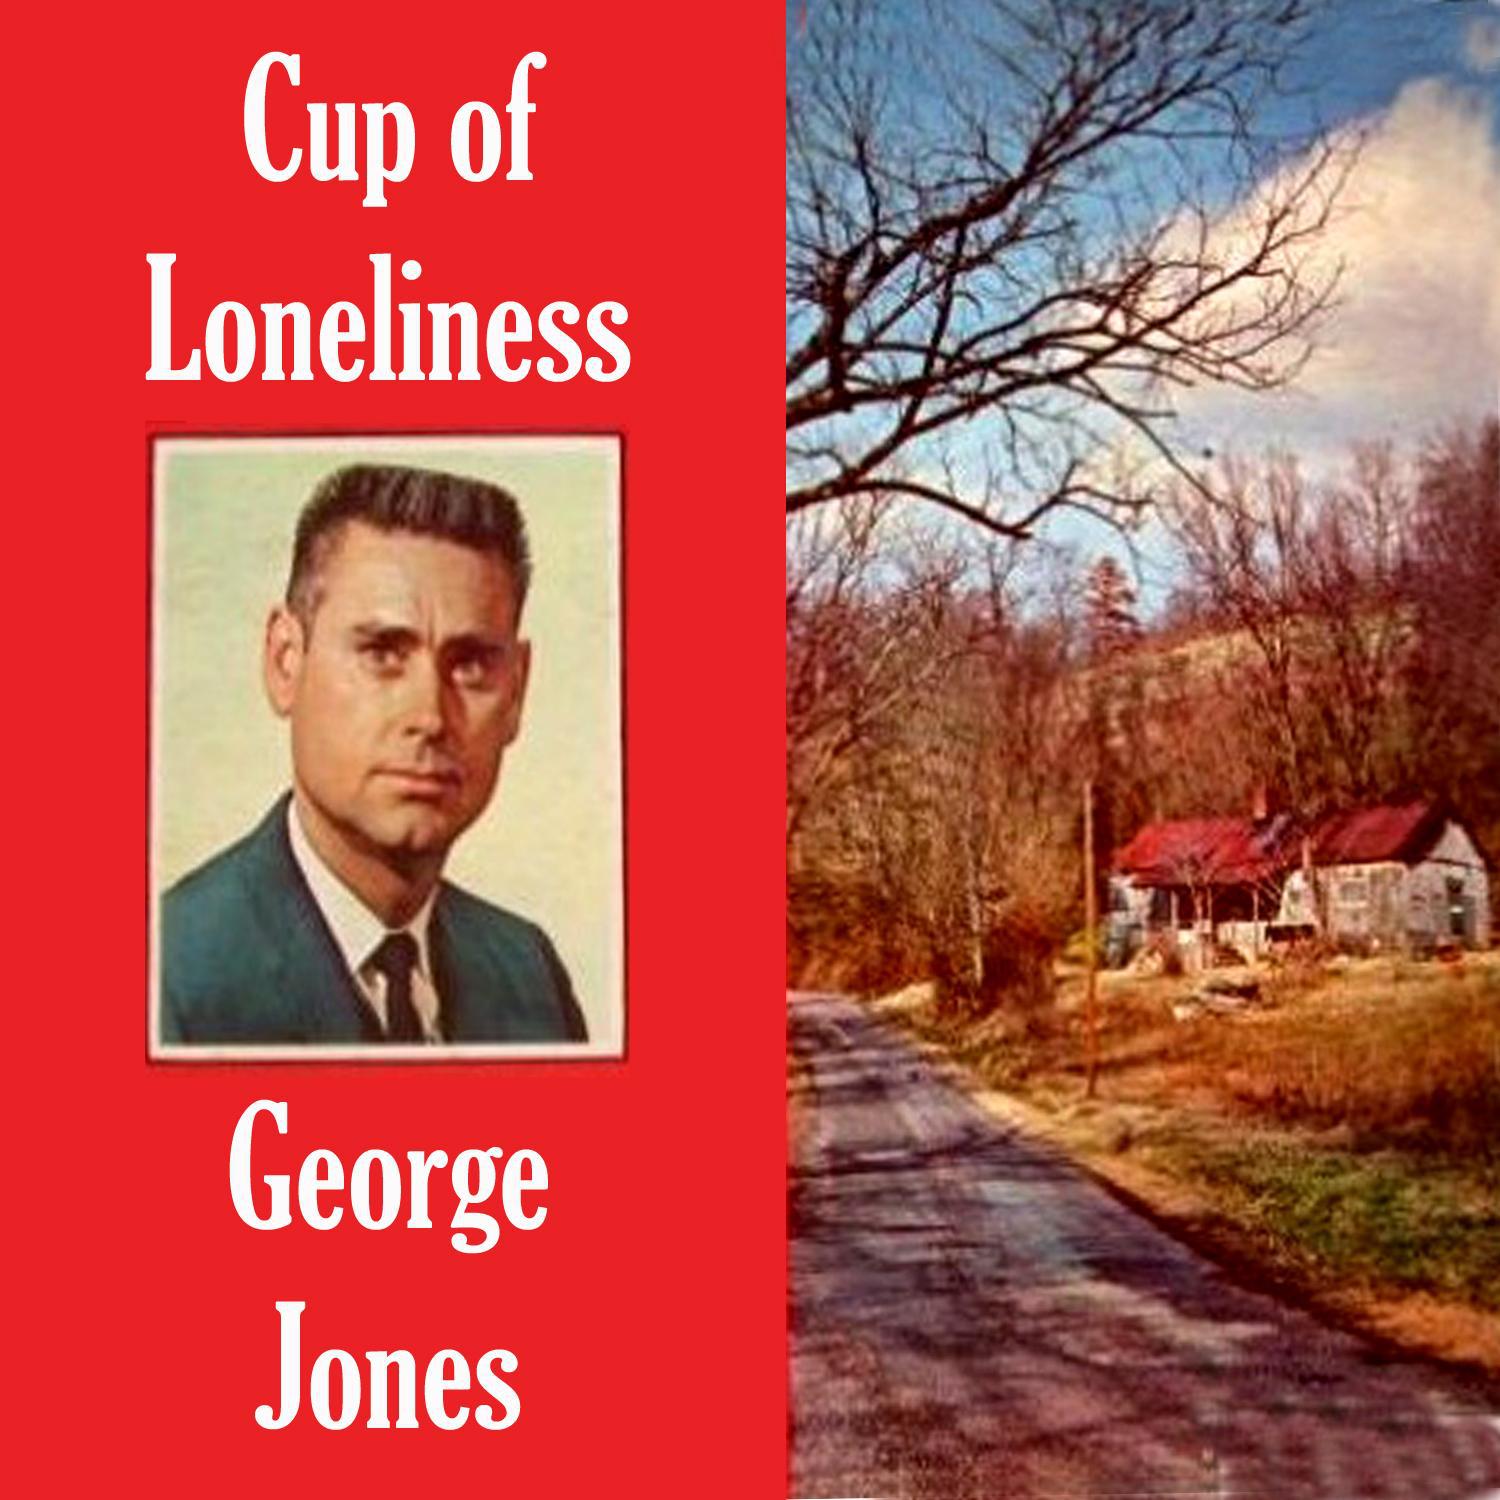 Cup of Loneliness